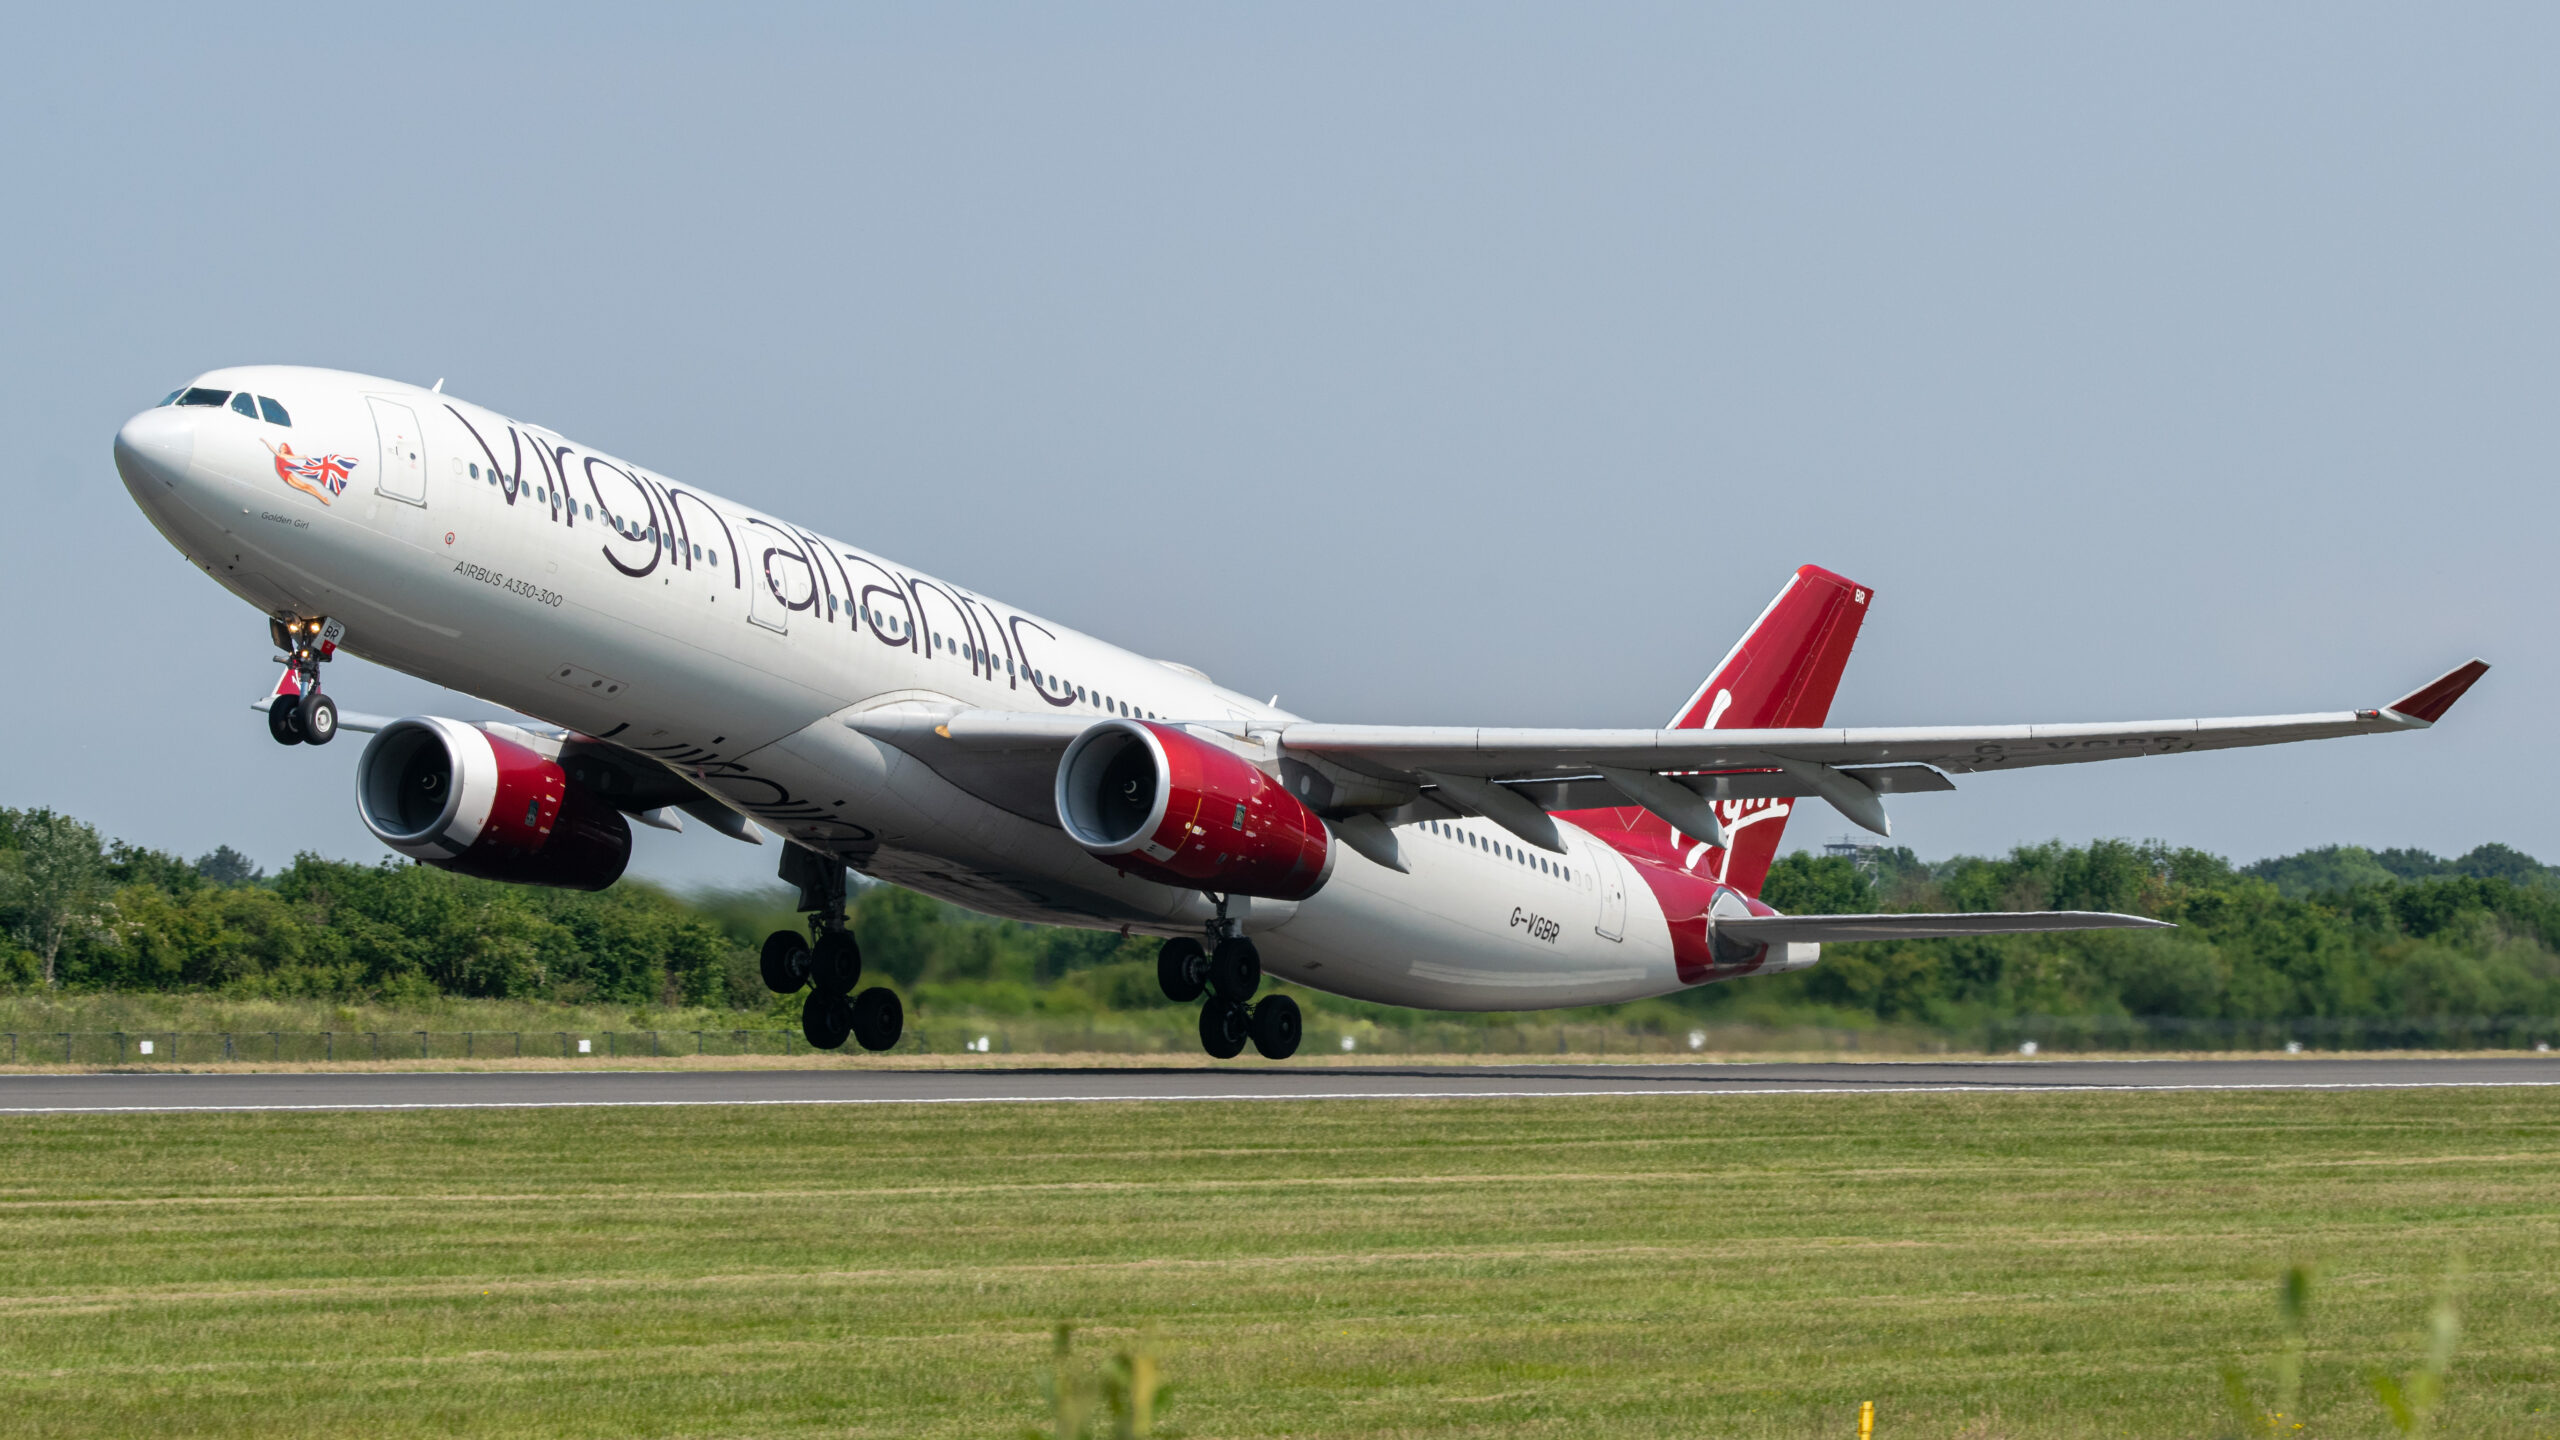 Virgin Atlantic's Strong Recovery in 2022 Financial Results